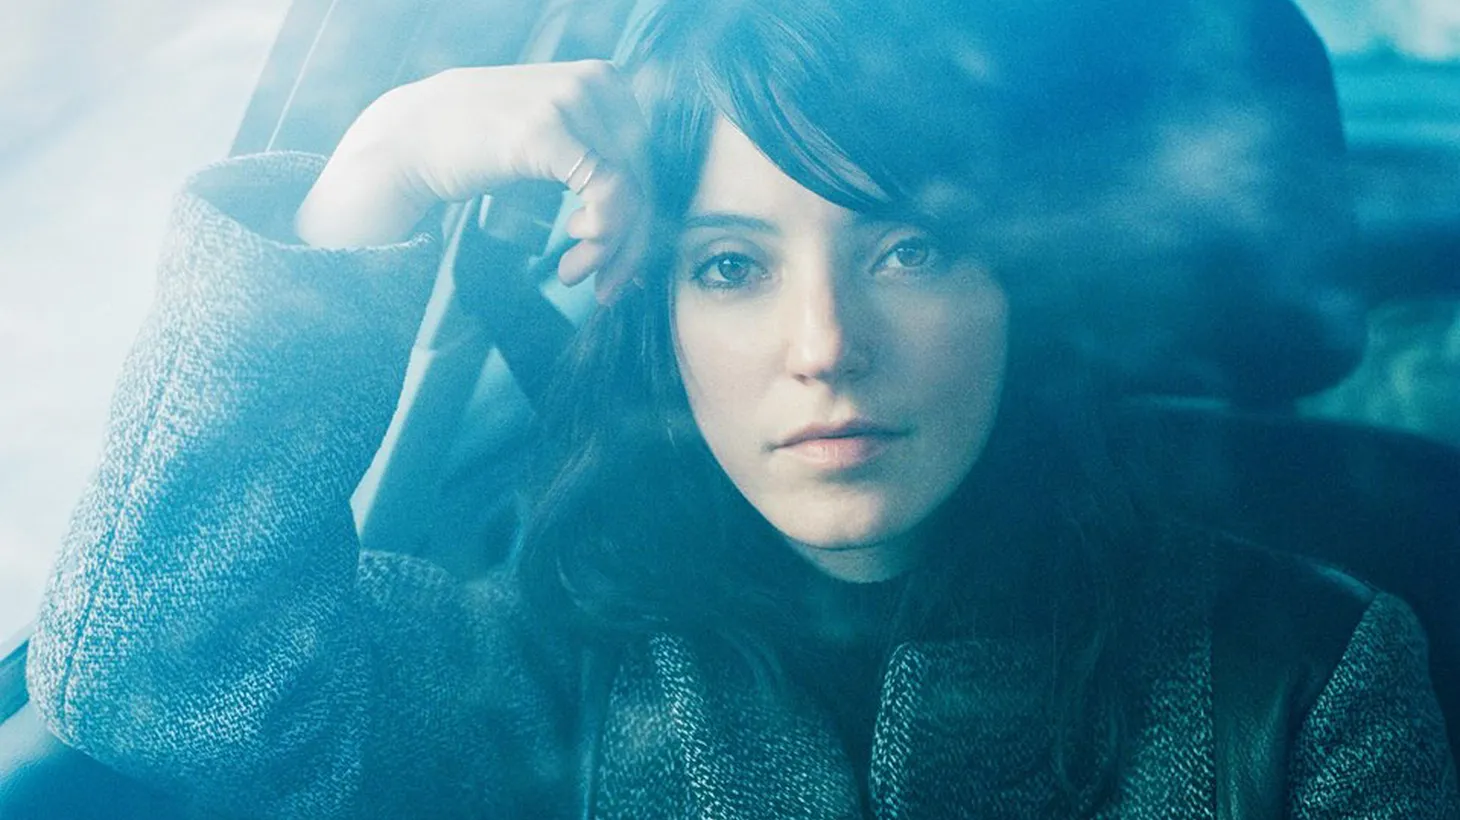 The new album from Brooklyn-based singer/songwriter Sharon Van Etten is emotional without being strident..